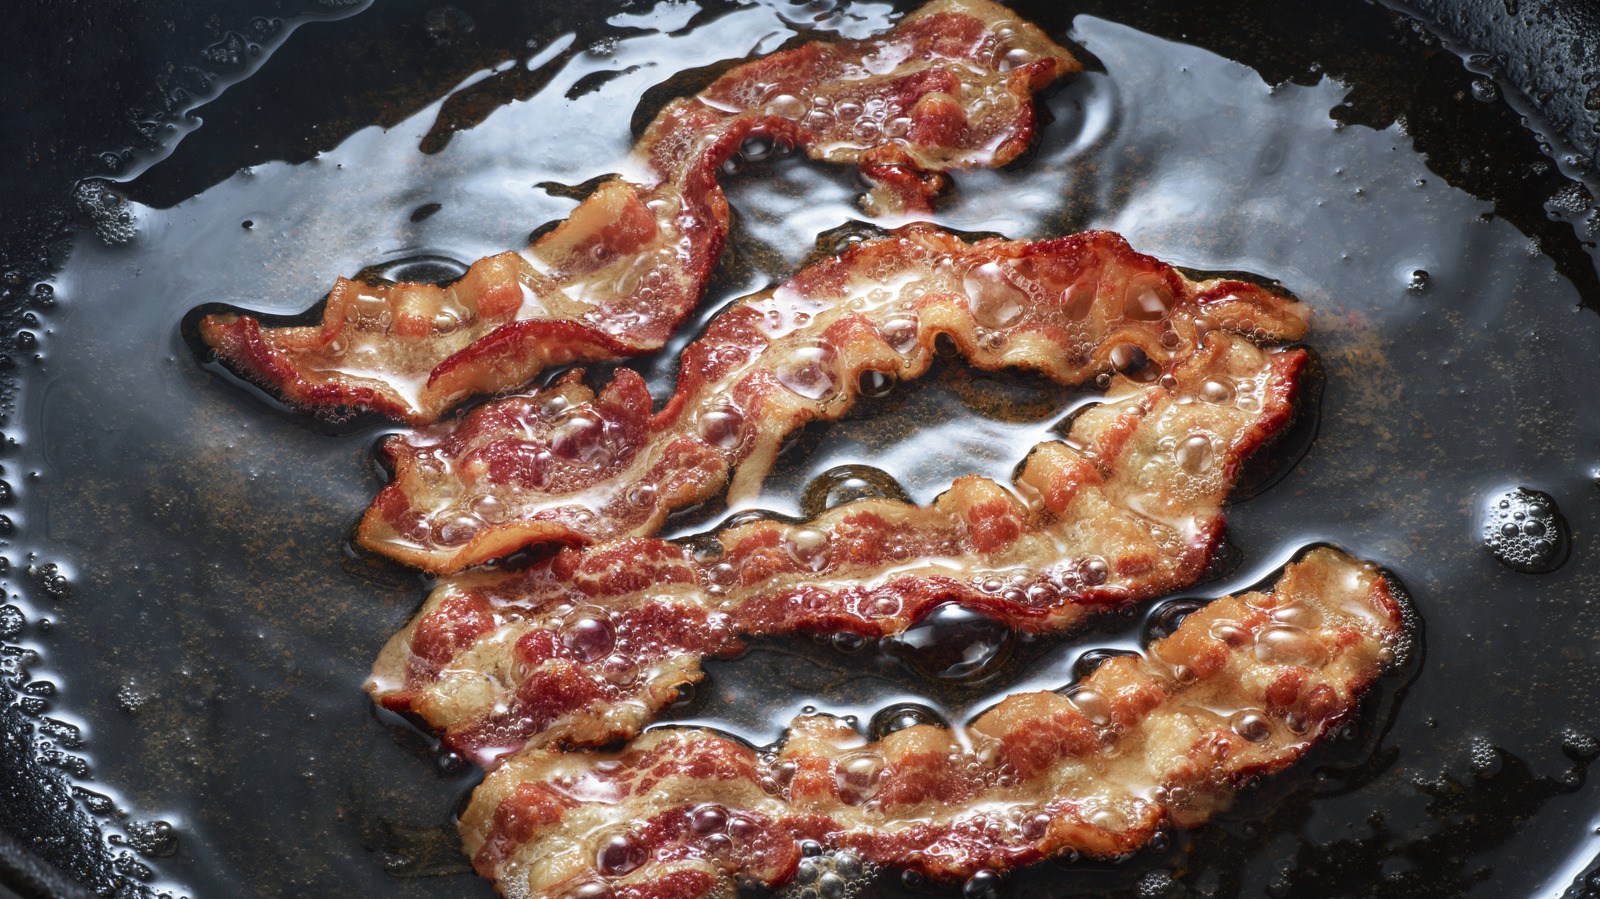 https://www.tastingtable.com/img/gallery/20-unexpected-ways-to-use-leftover-bacon/l-intro-1671825028.jpg